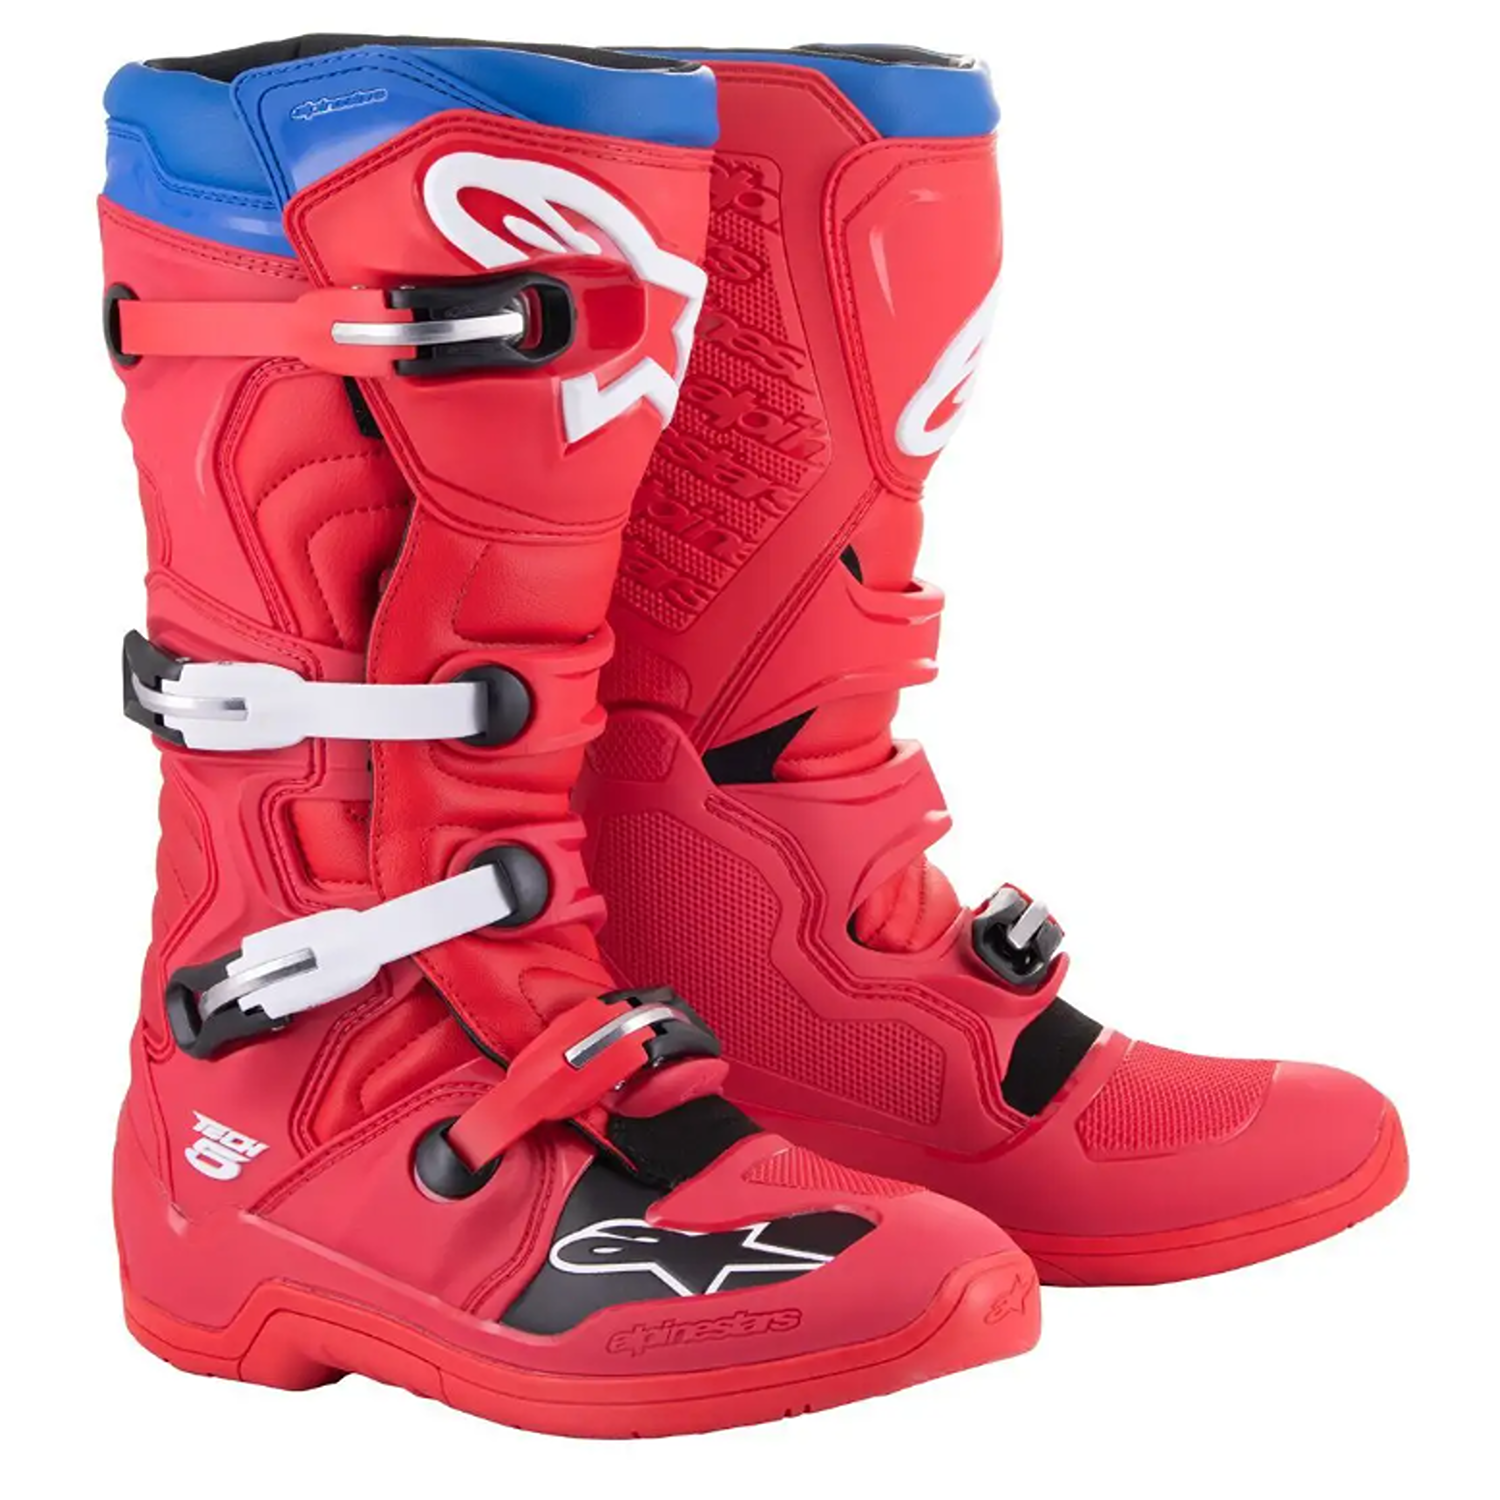 Image of Alpinestars Tech 5 Boots Bright Red Dark Red Blue Taille US 14